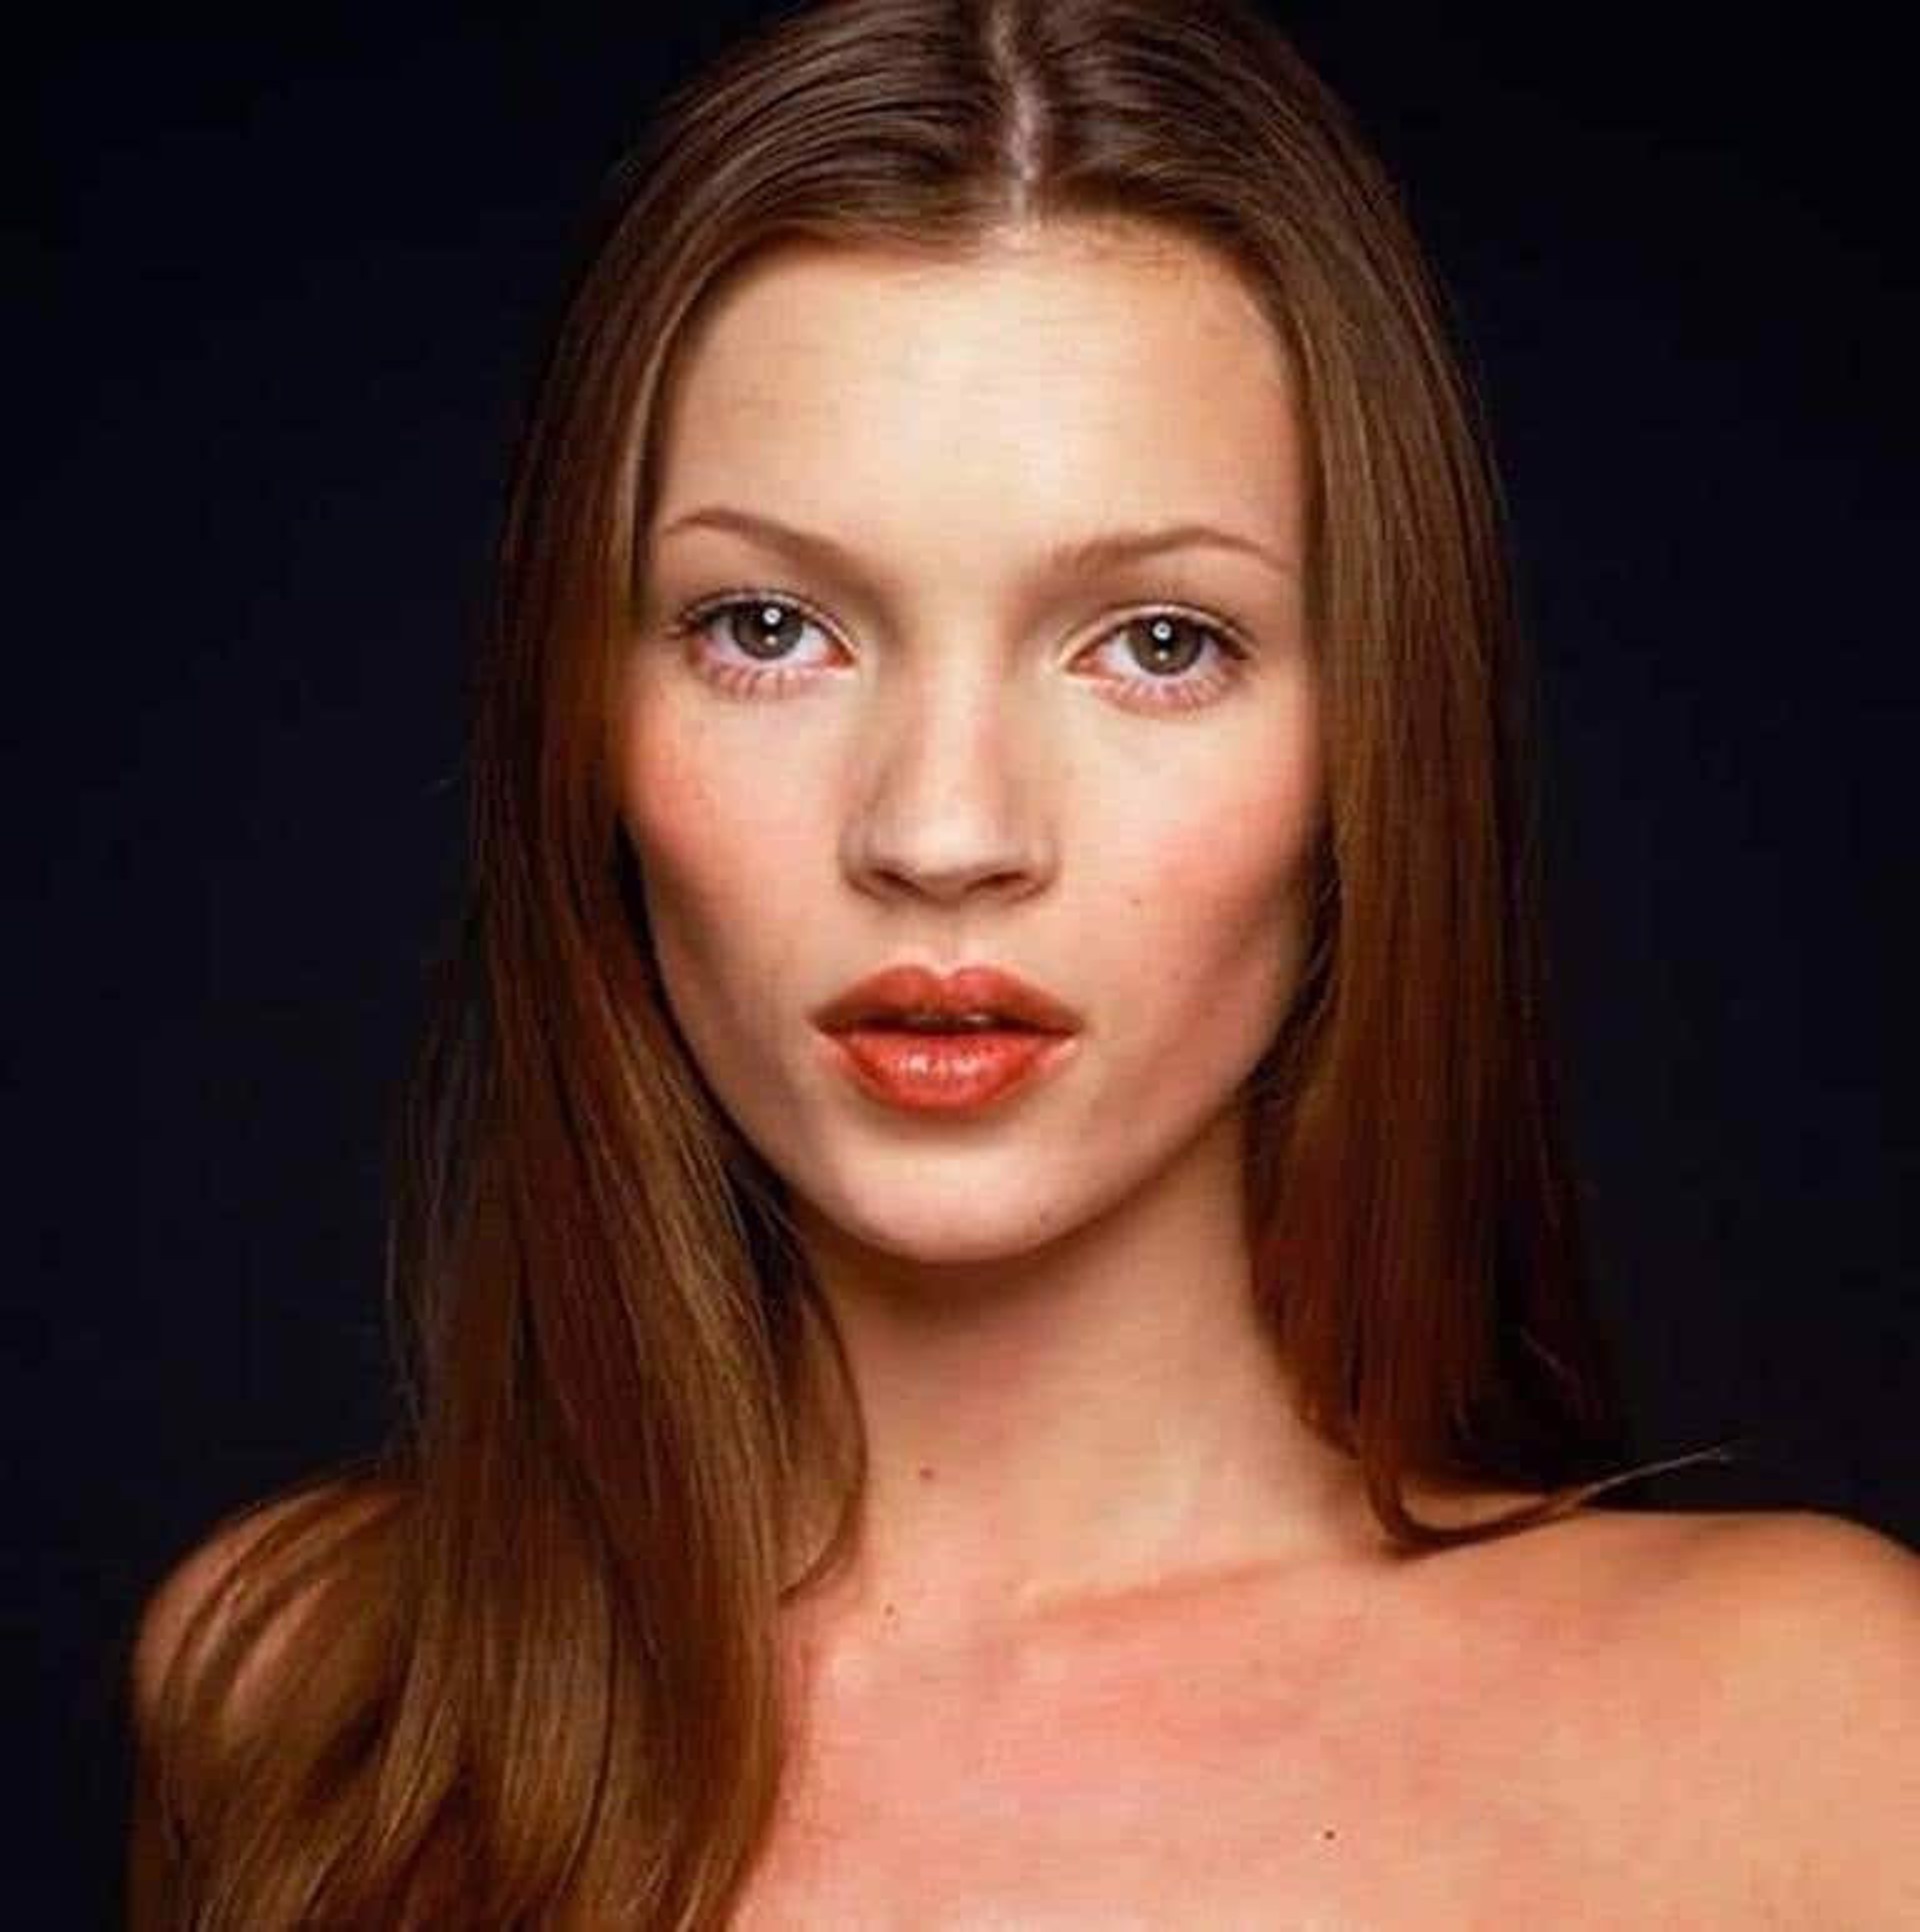 Kate Moss by Terry O'Neill